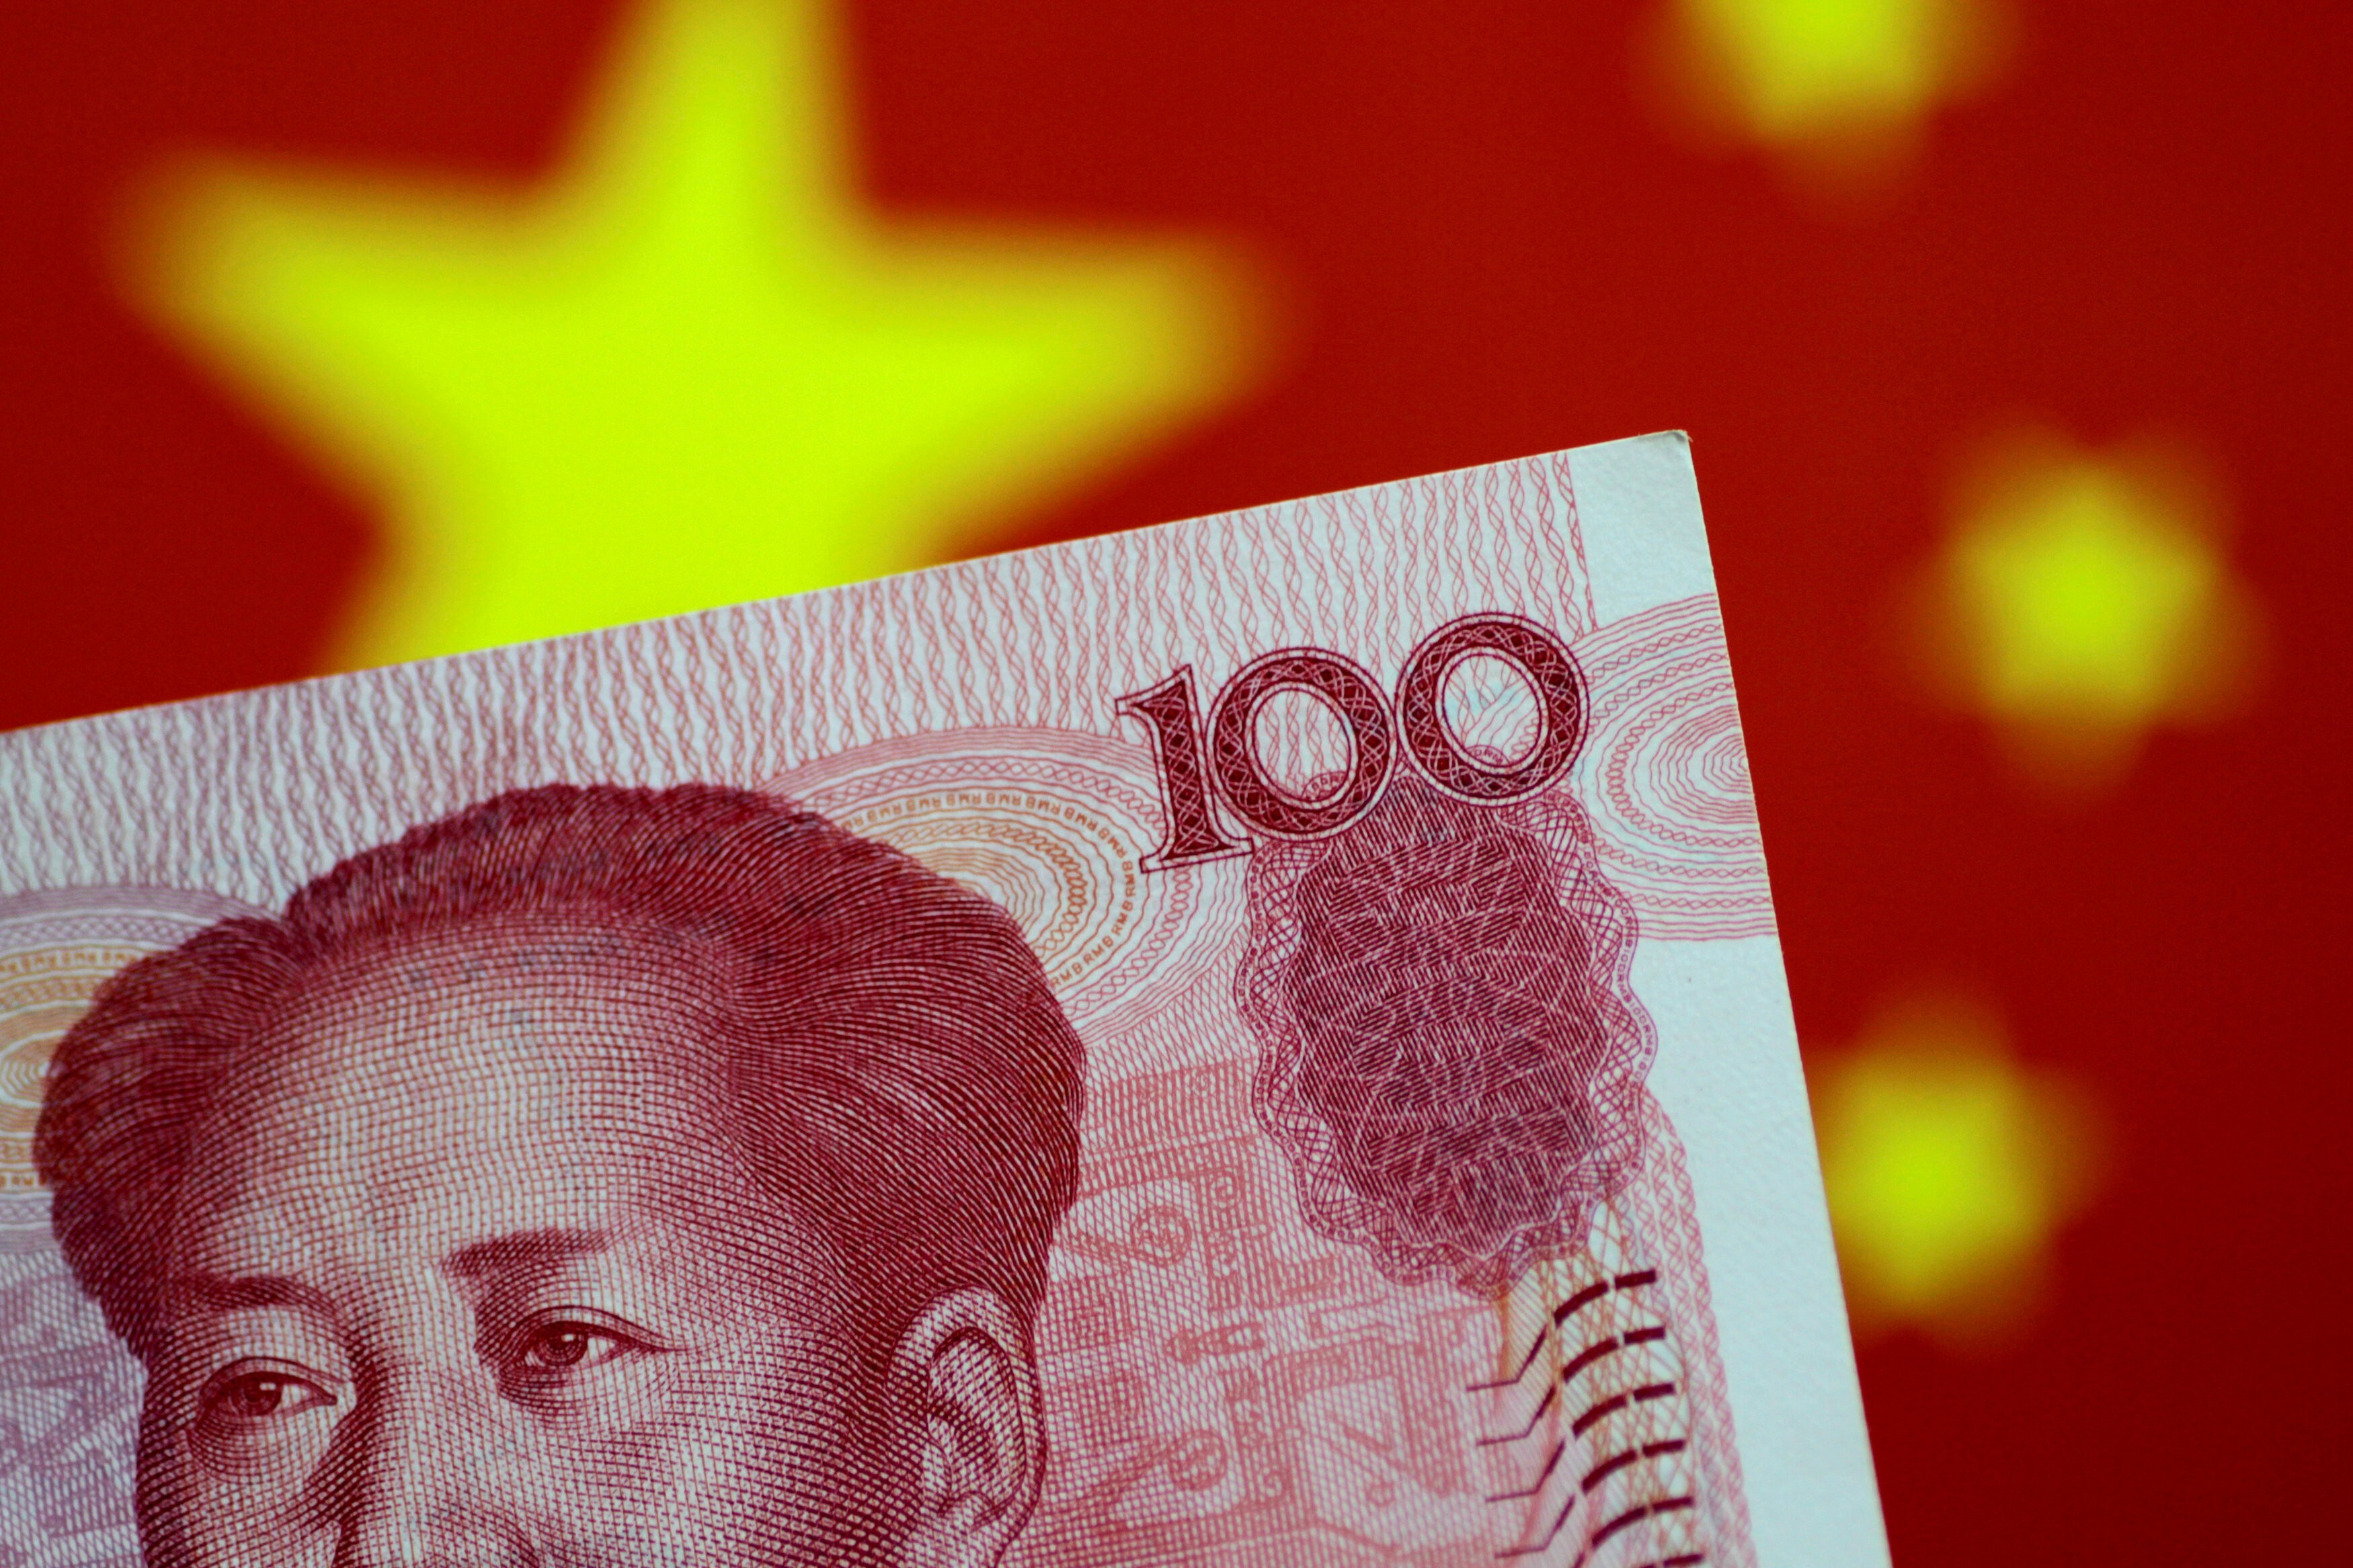 Beijing has backed the Washington-led initiative to implement a global minimum tax rate. Photo: Reuters